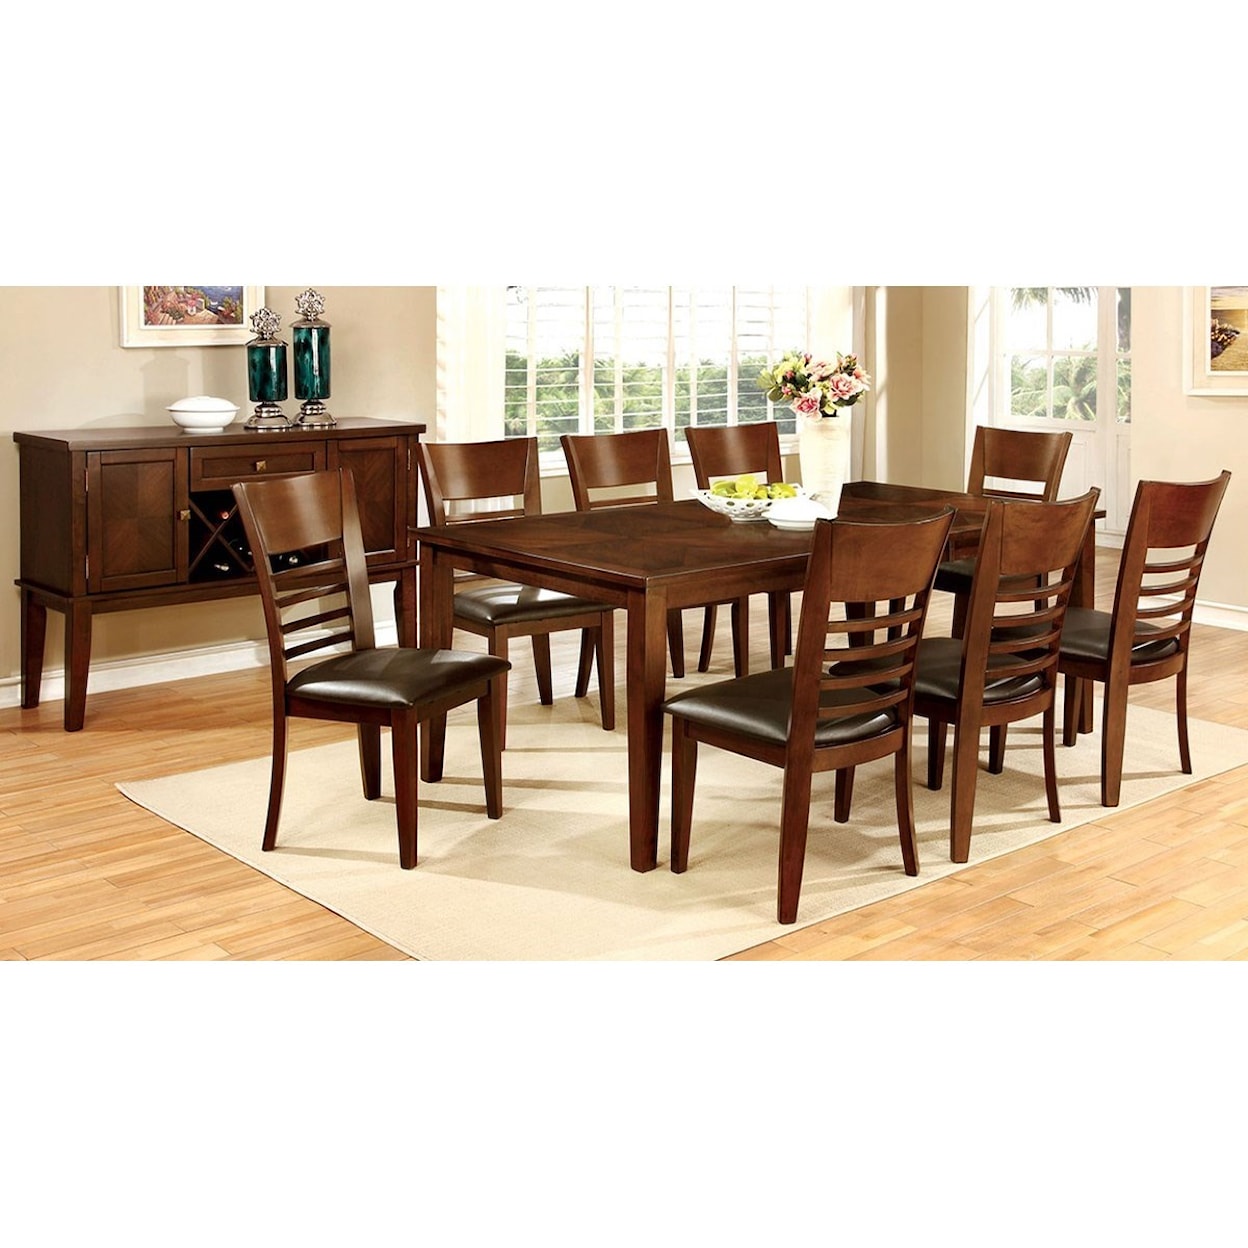 FUSA Hillsview Dining Table